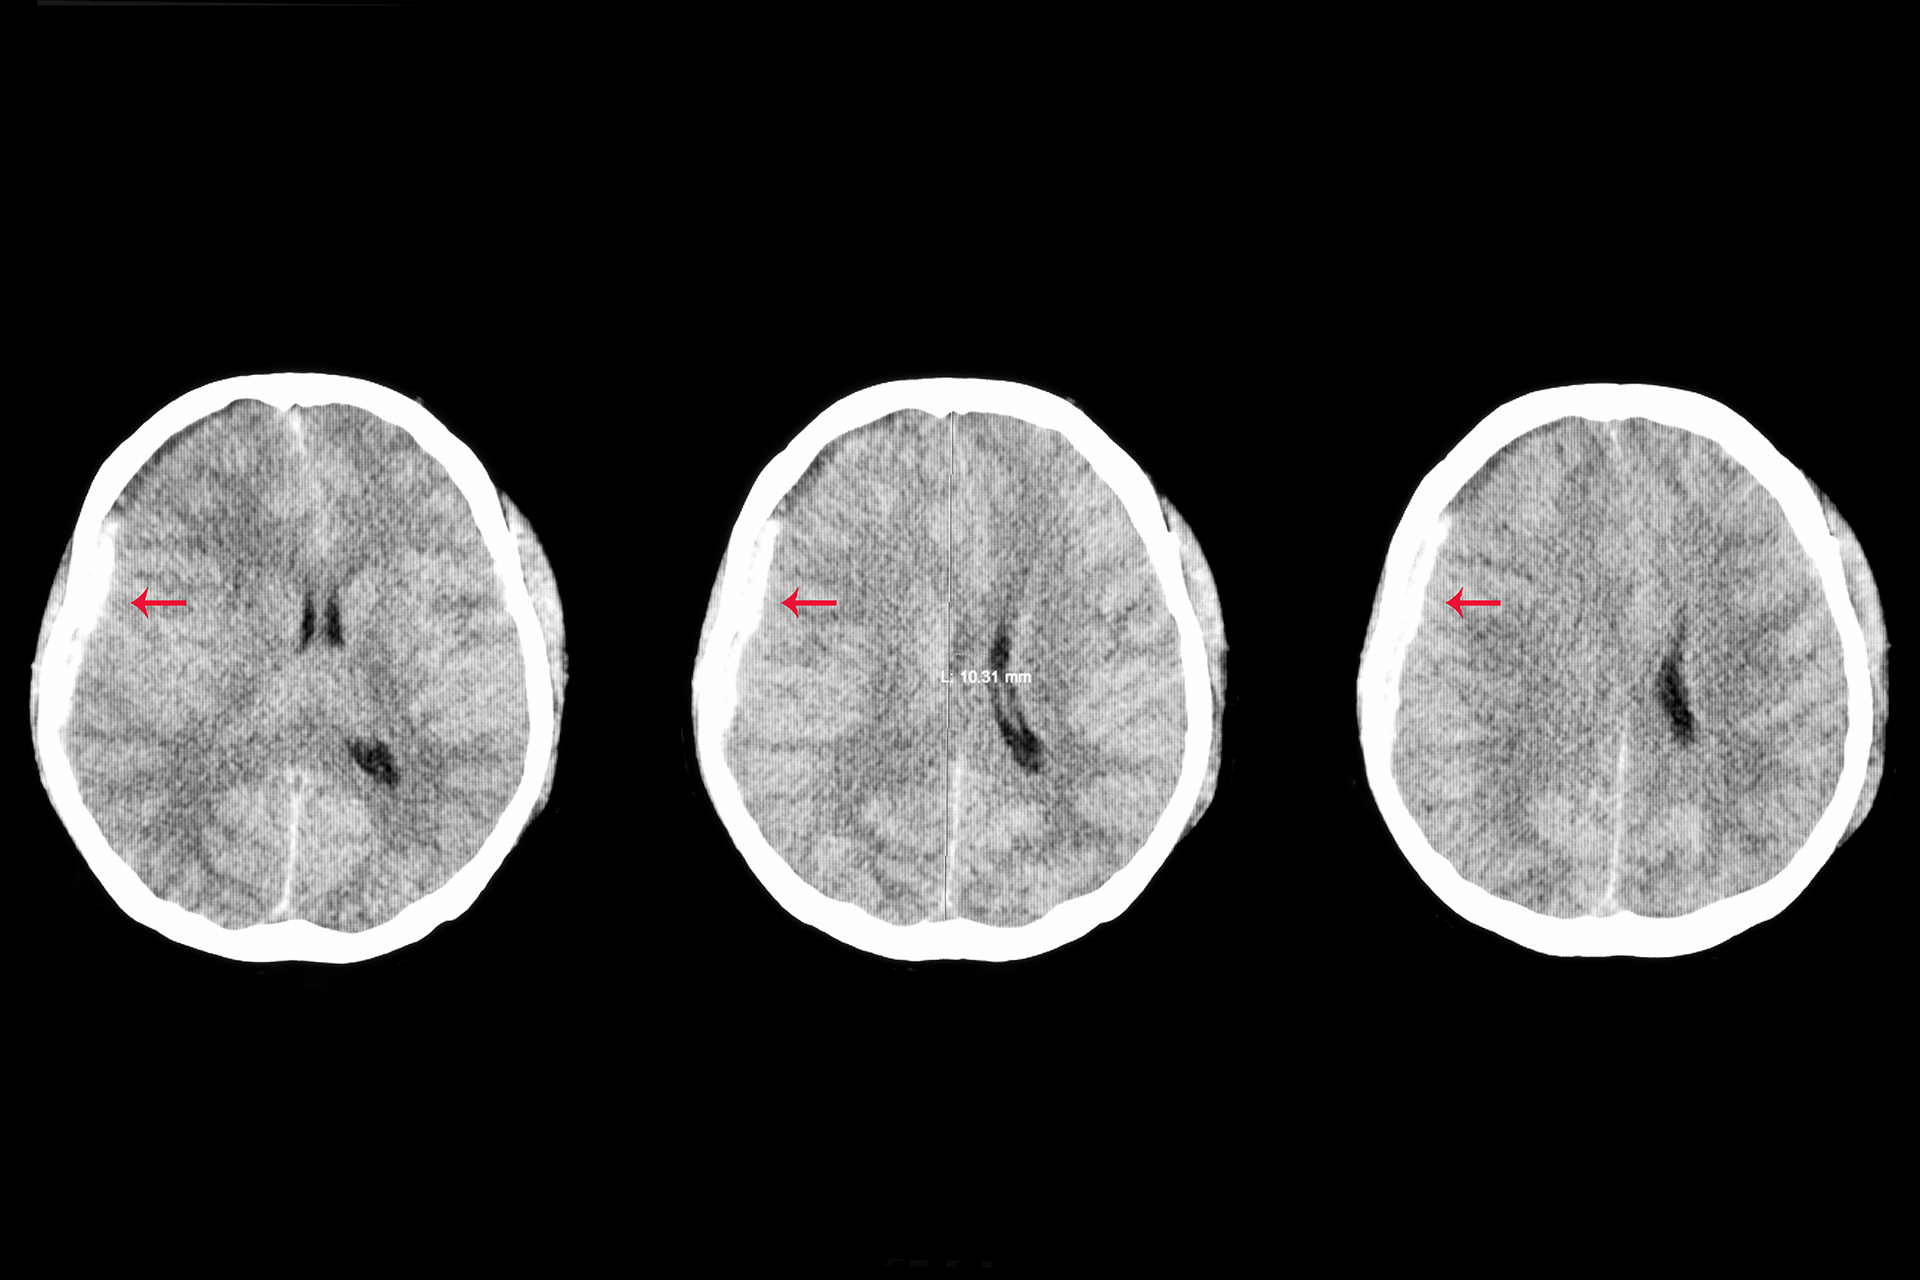 picture of three brains showing brain injury